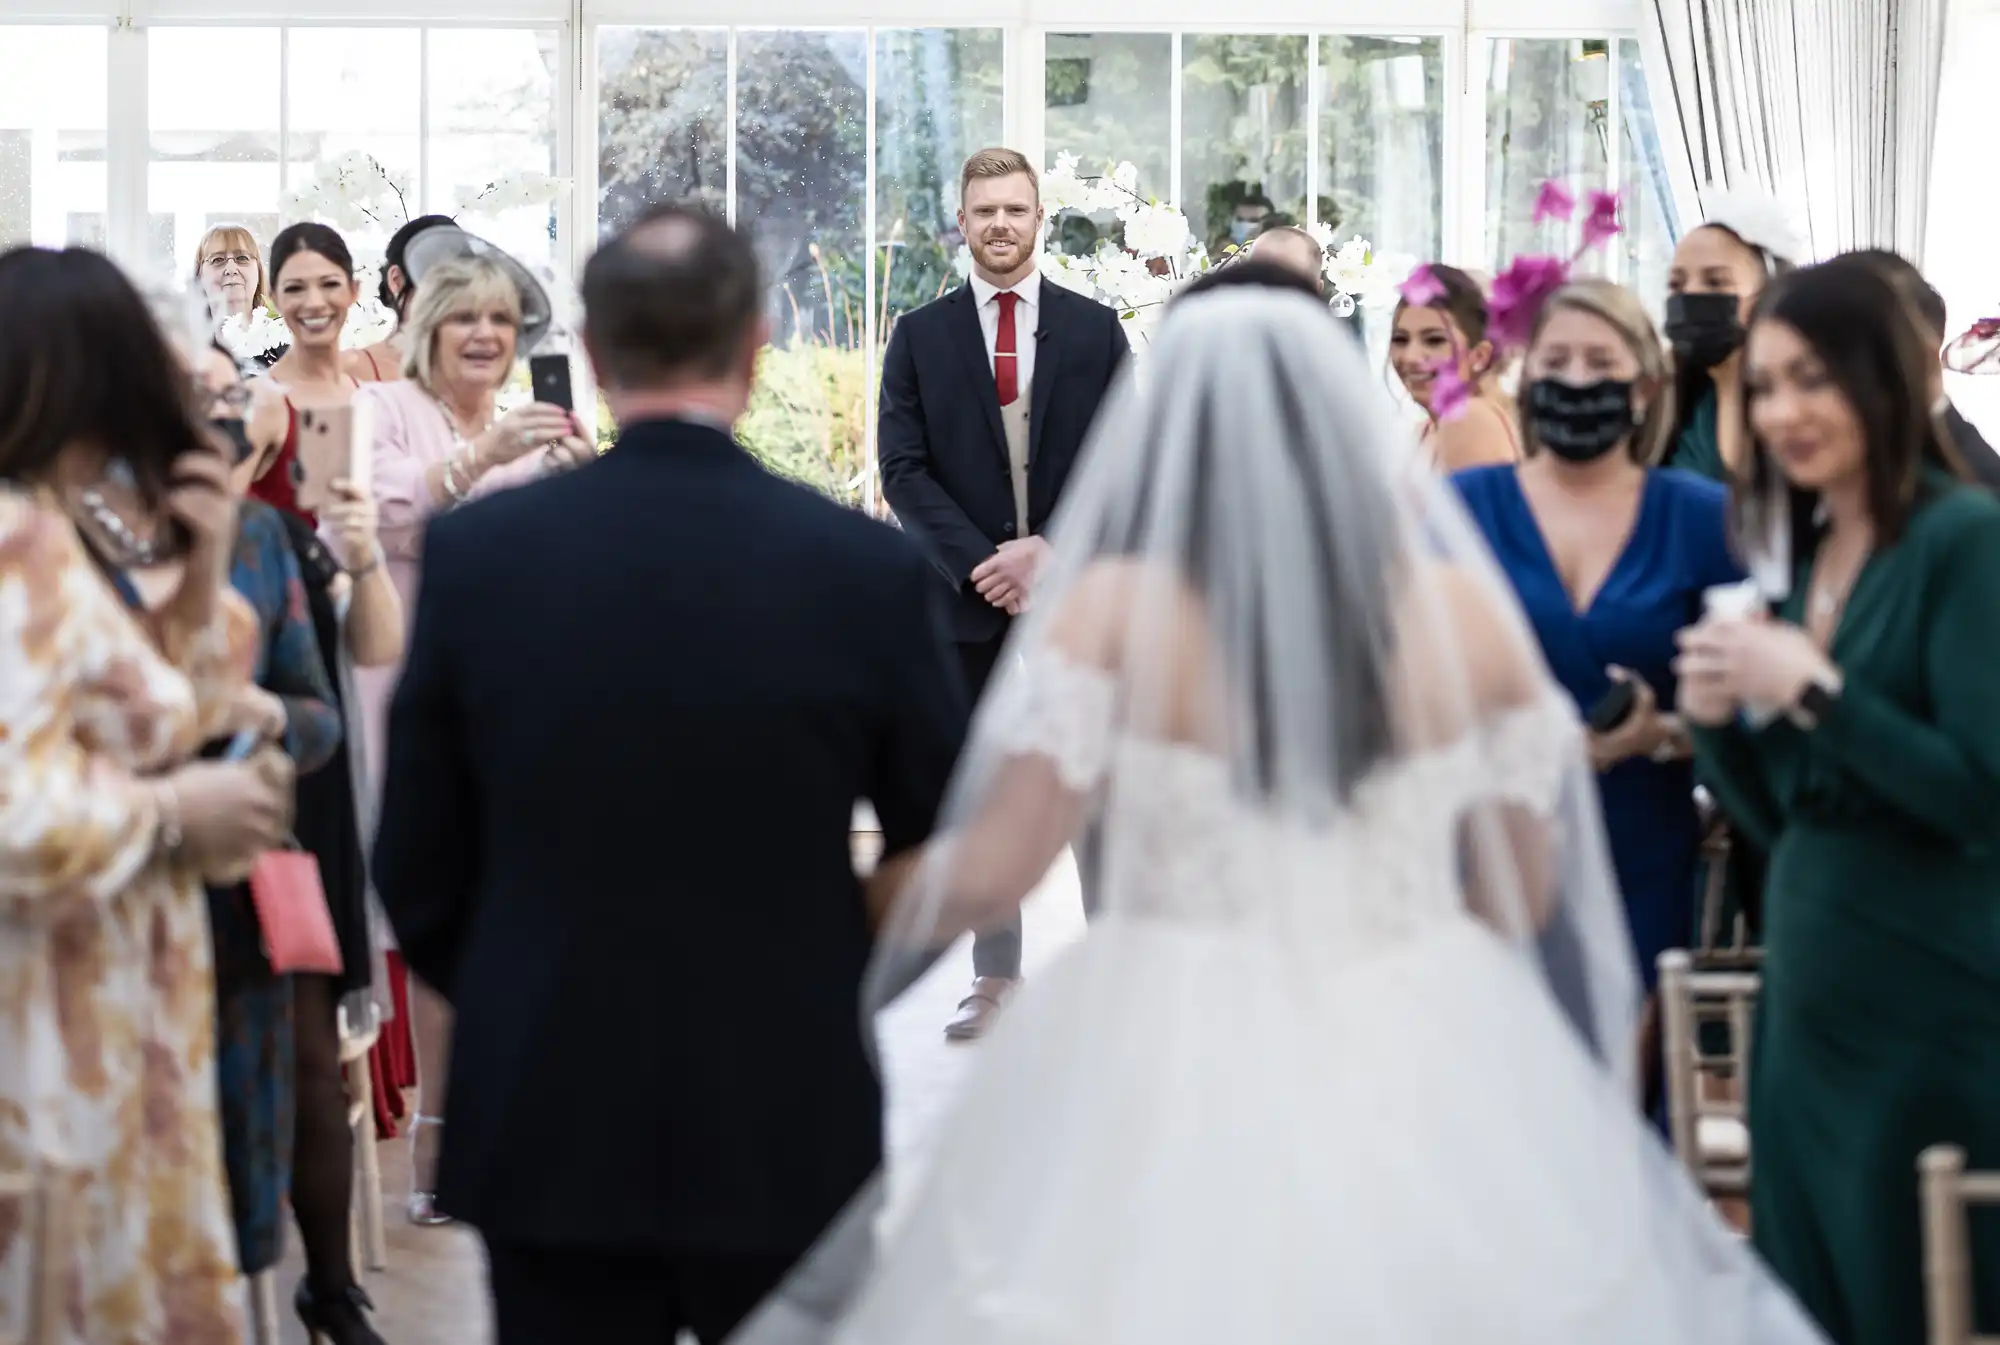 A bride walks down the aisle towards the groom, who stands at the altar. Guests, some taking photos, watch the scene inside a bright wedding venue.